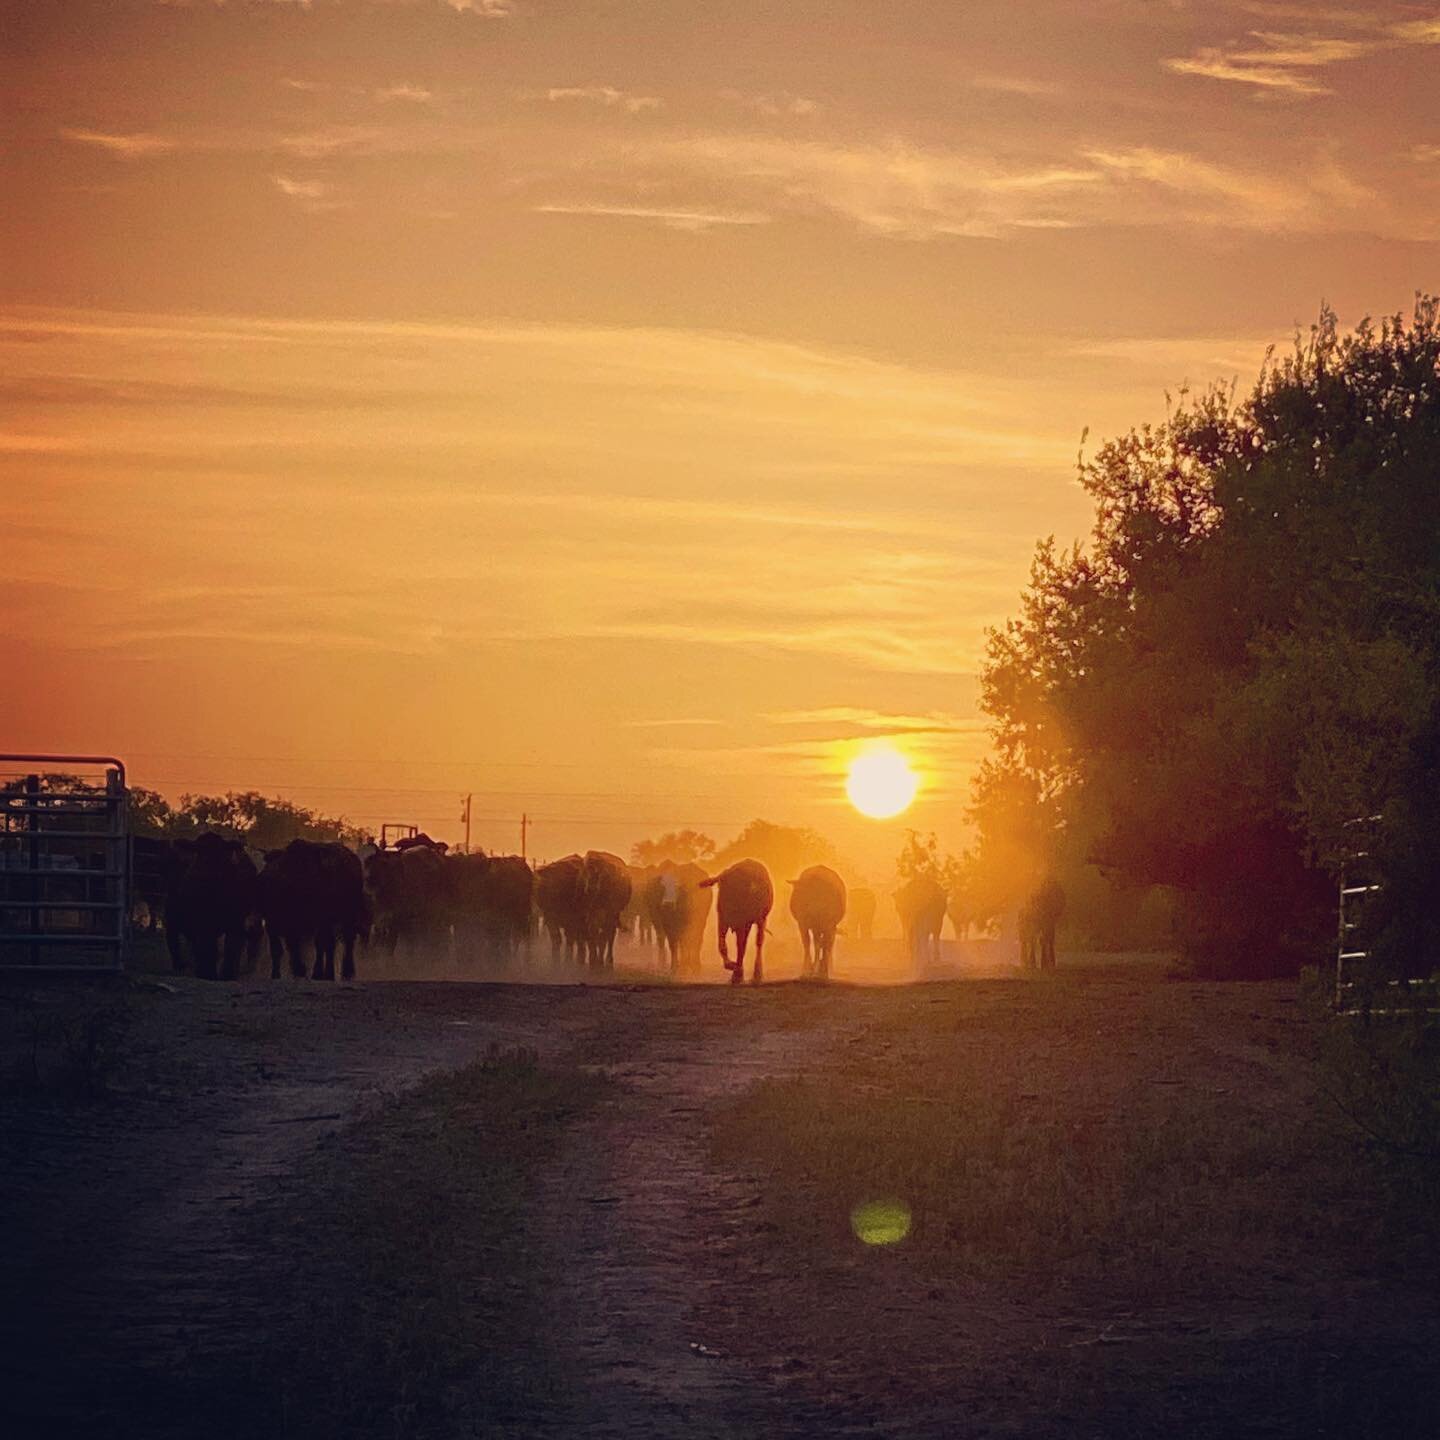 Finding beauty in these hot summer nights 
&bull;
&bull;
&bull;
#localbeef #southtexas #drought #texas #beef #ranching #eatlocal #ranchlife #ranching #agriculture #aglife #farm #farmer #farmlife #agro #photography #agricultureworldwide #farmtotable #